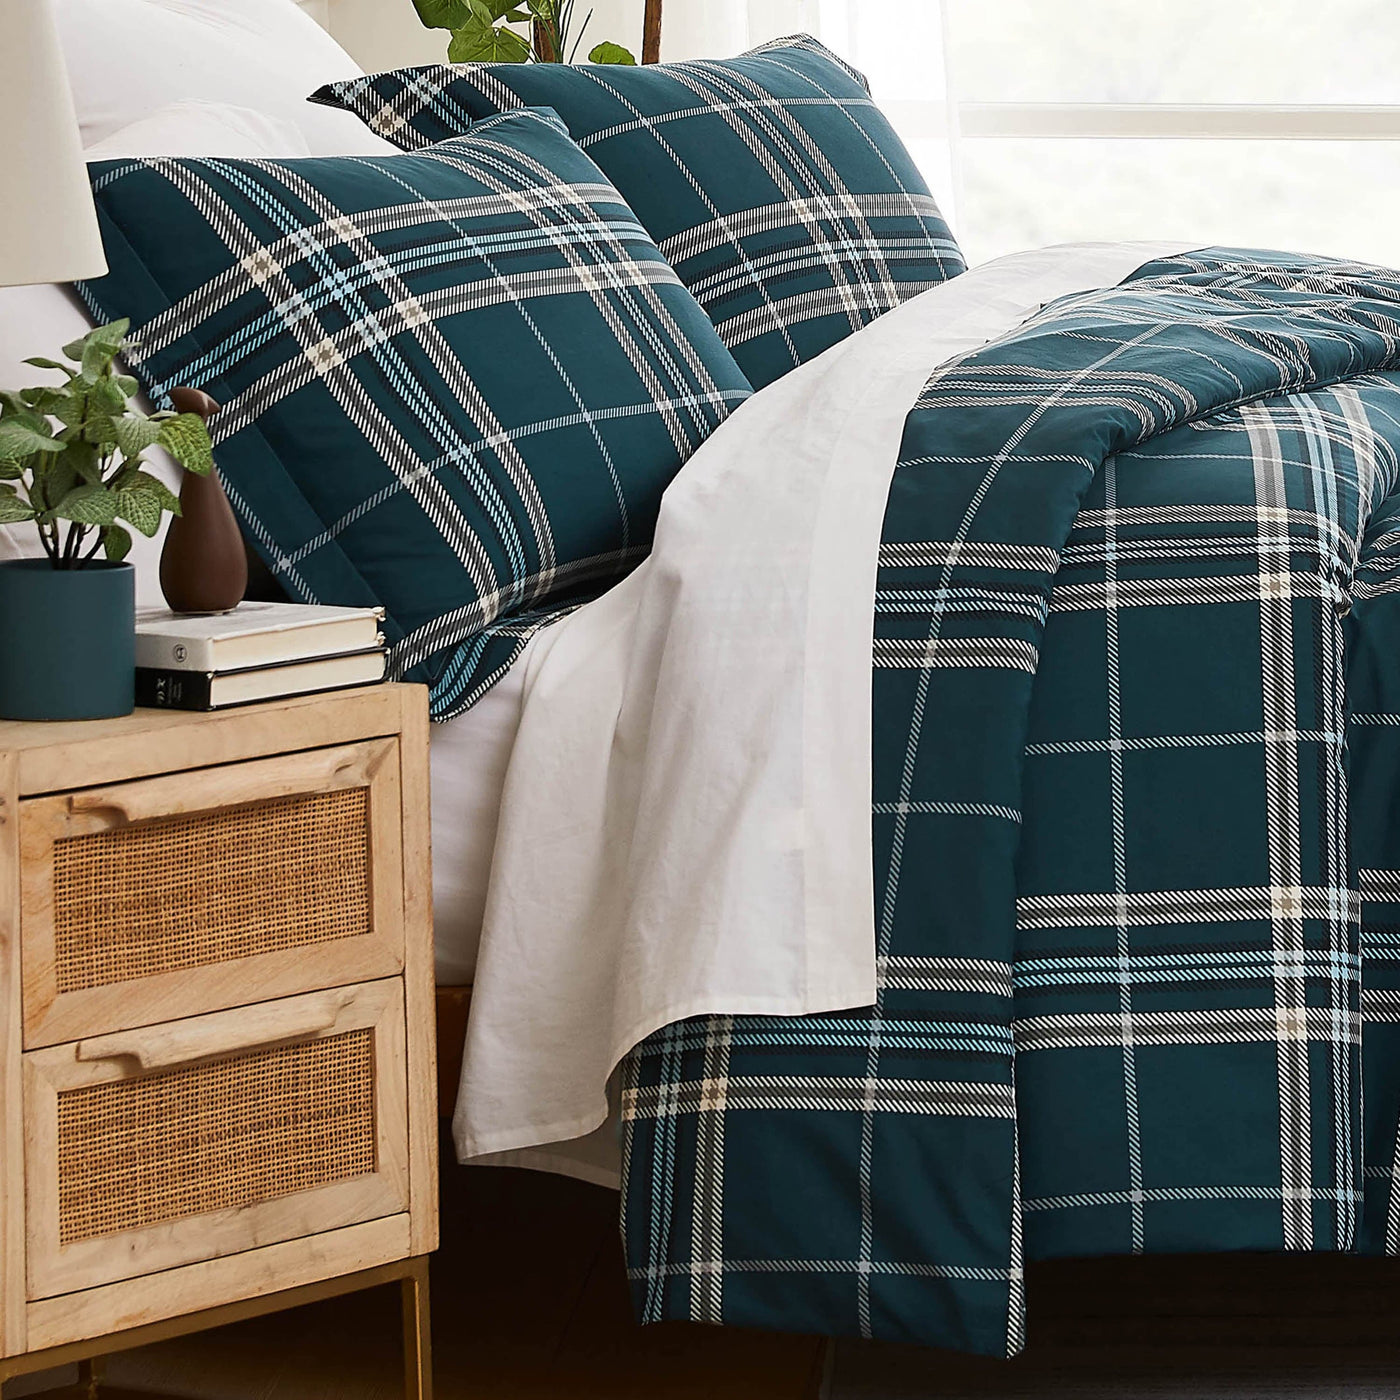 Side View of Vilano Plaid Duvet Cover Set in Grey in grey#color_plaid-blue